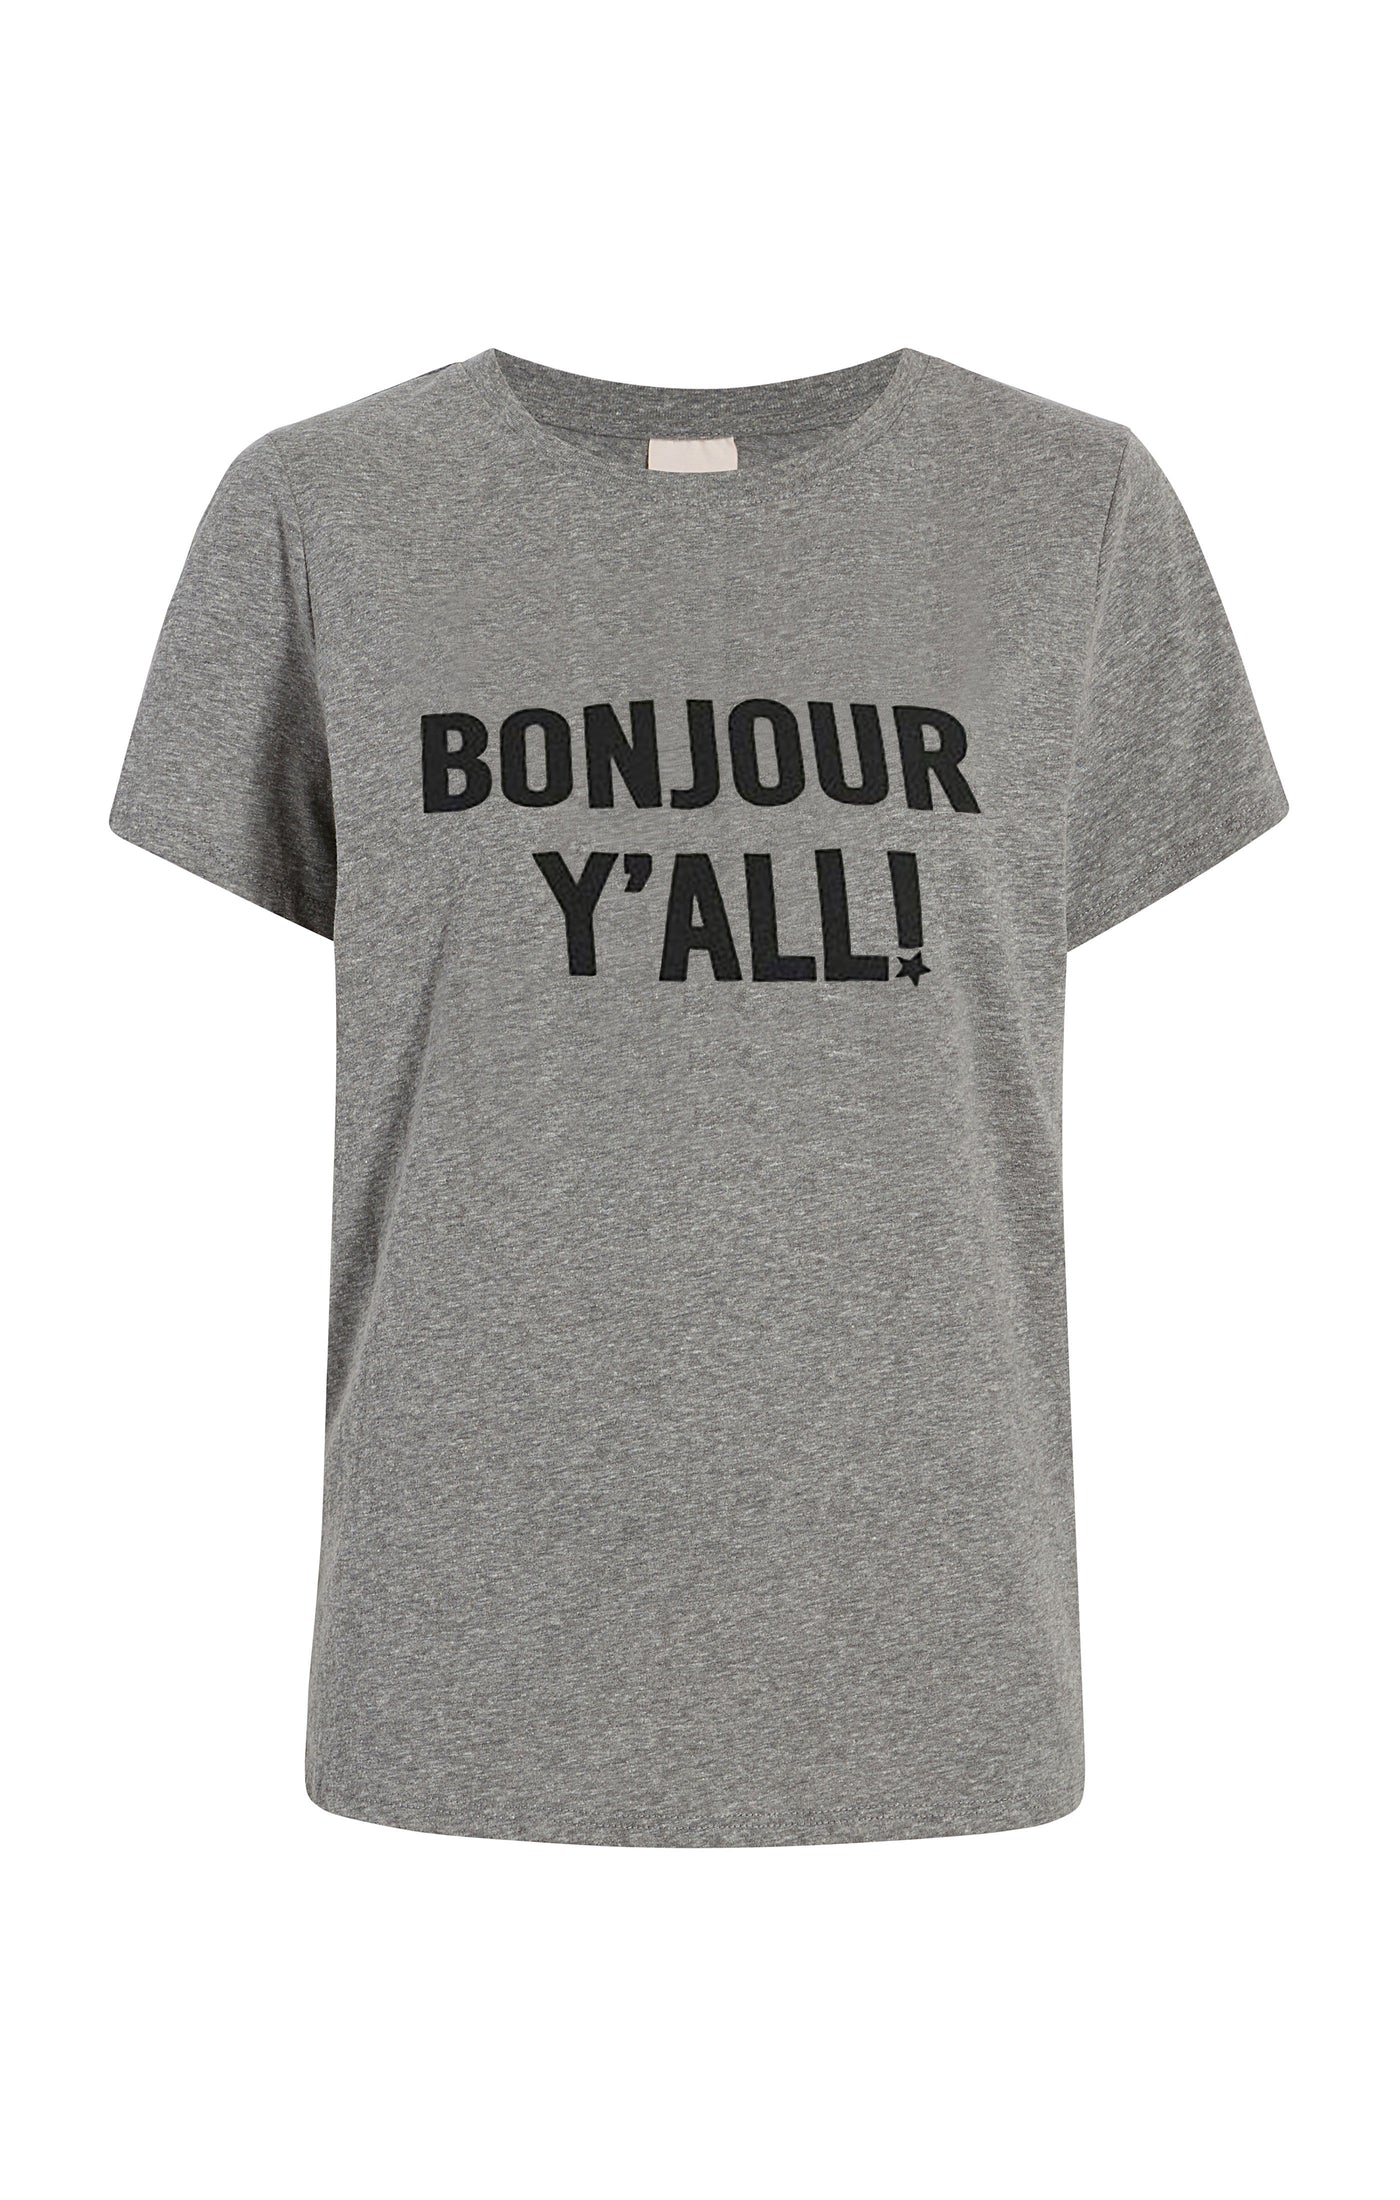 Bonjour Y'all Tee